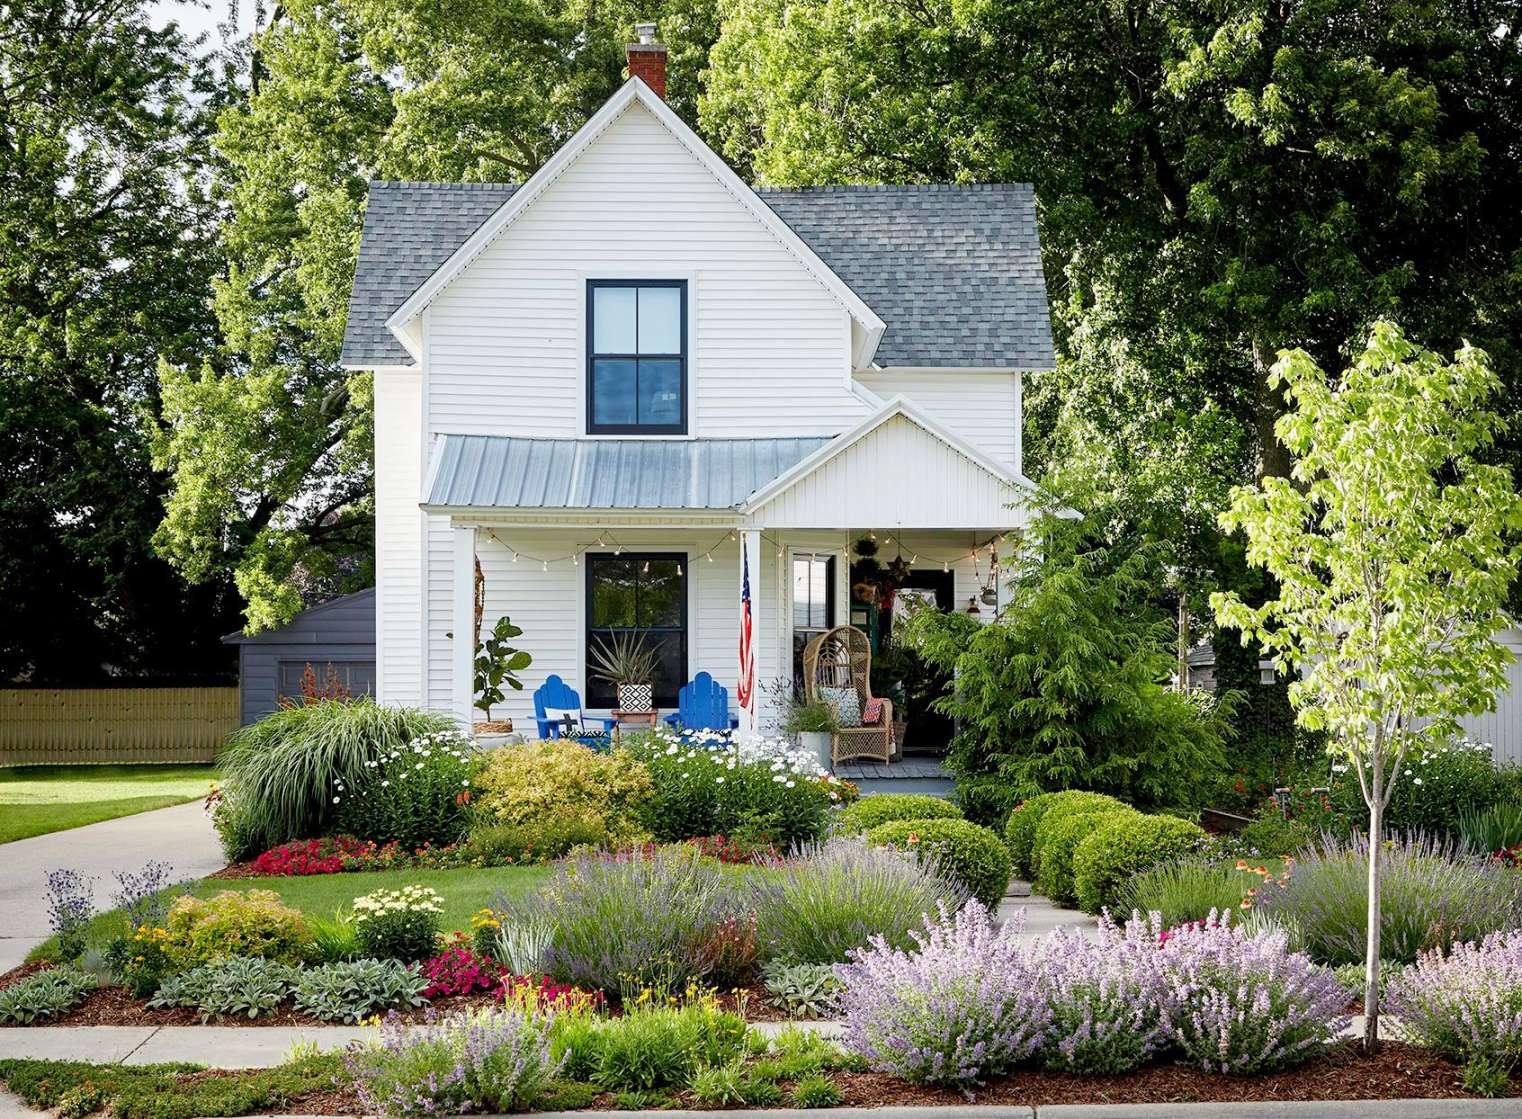 Landscaping Projects That Add Value to Your Home